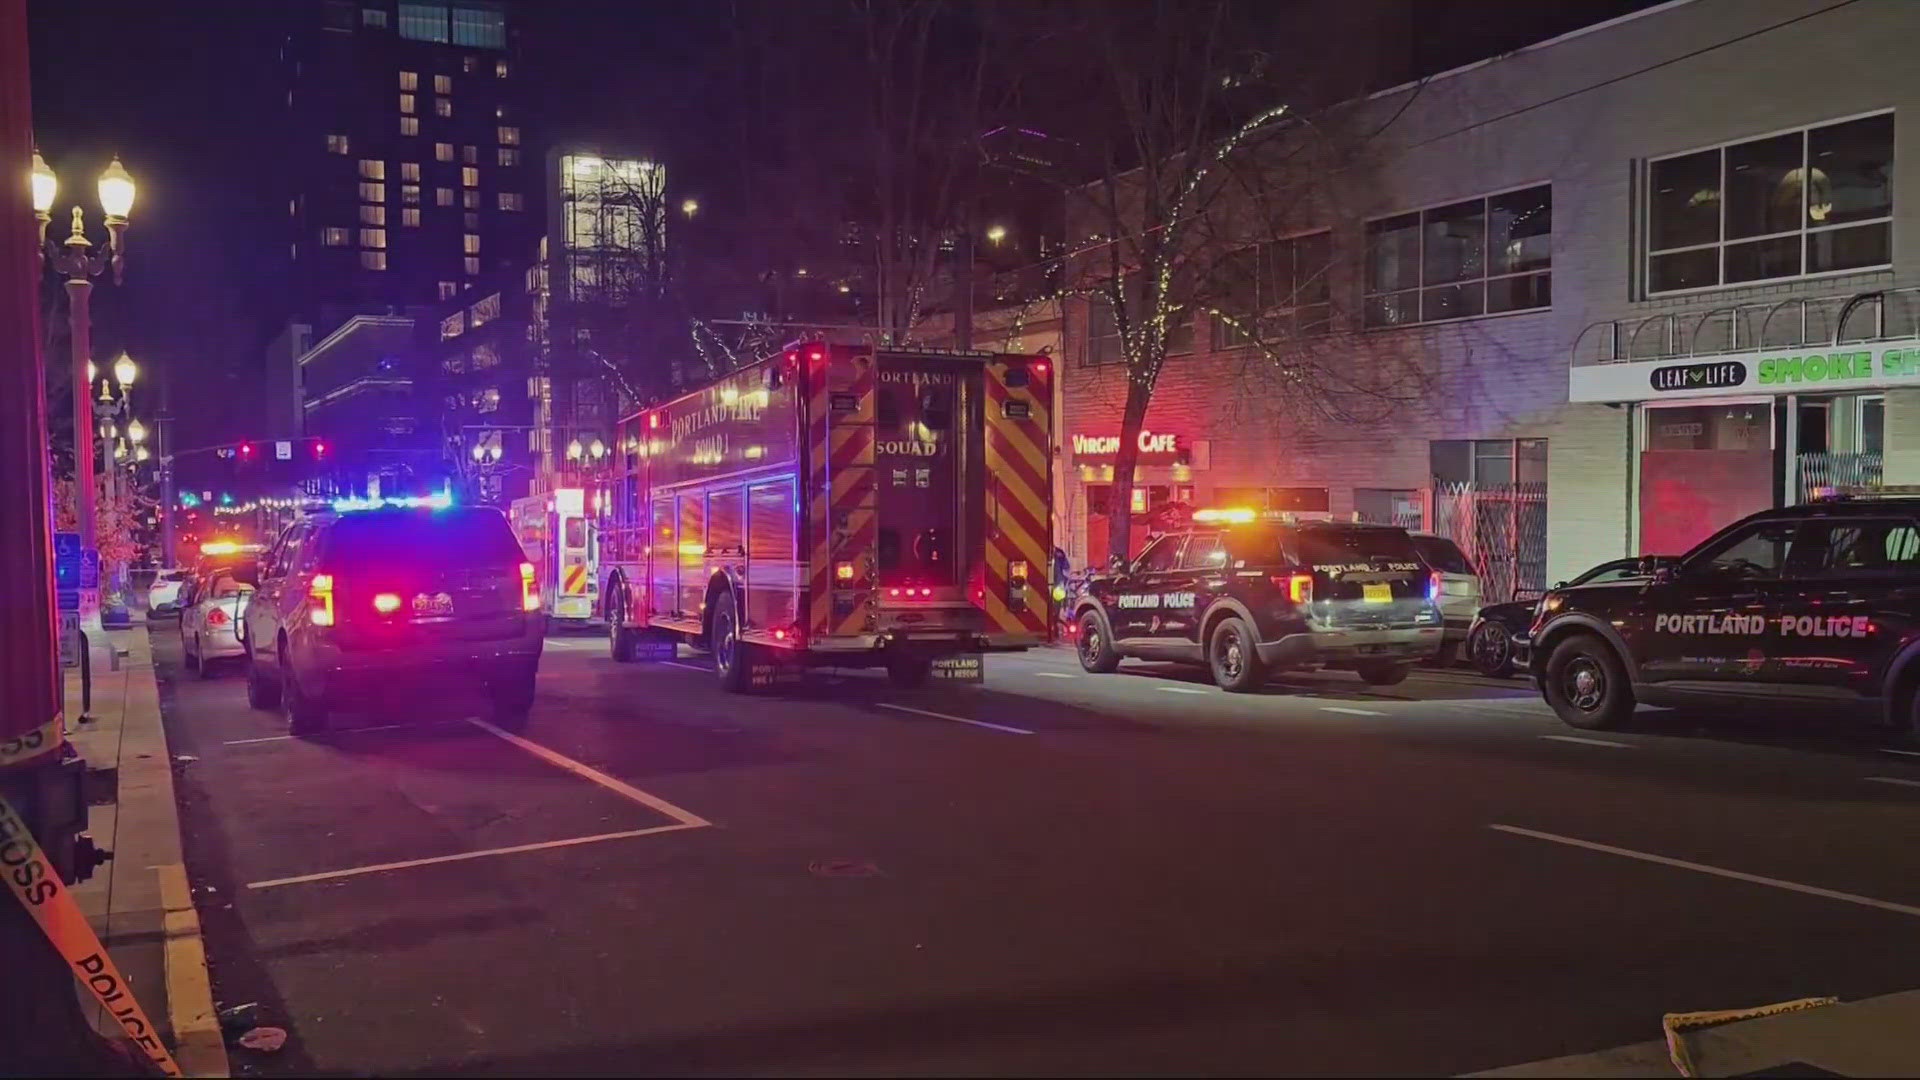 Portland police found a man with a gunshot wound near Southwest 10th Avenue and Southwest Yamhill Street late Sunday night. He was taken to a hospital where he died.